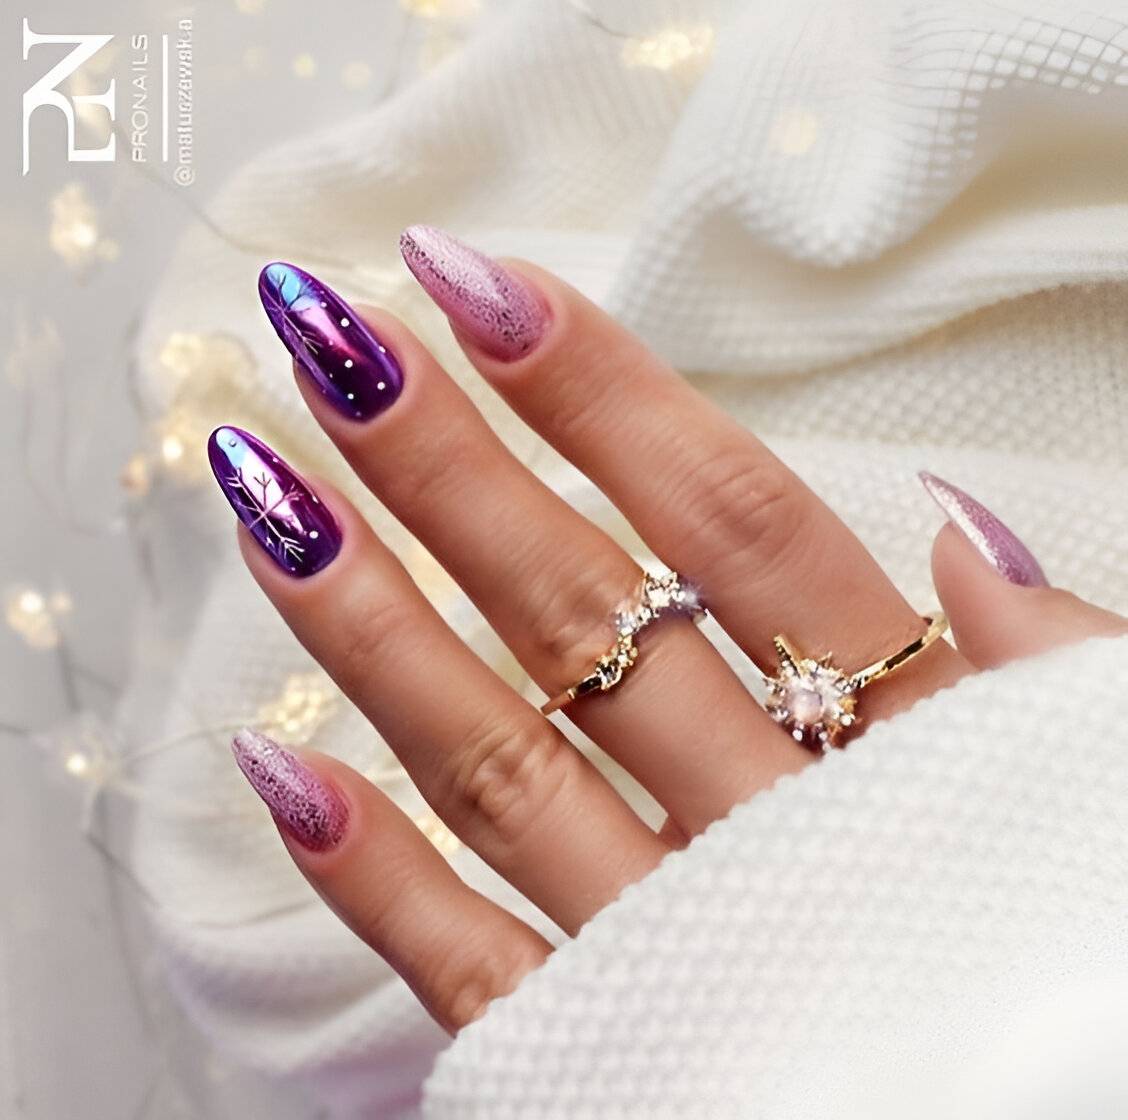 30 Chic Chrome Nail Designs For The Ultimate Glam Look - 239